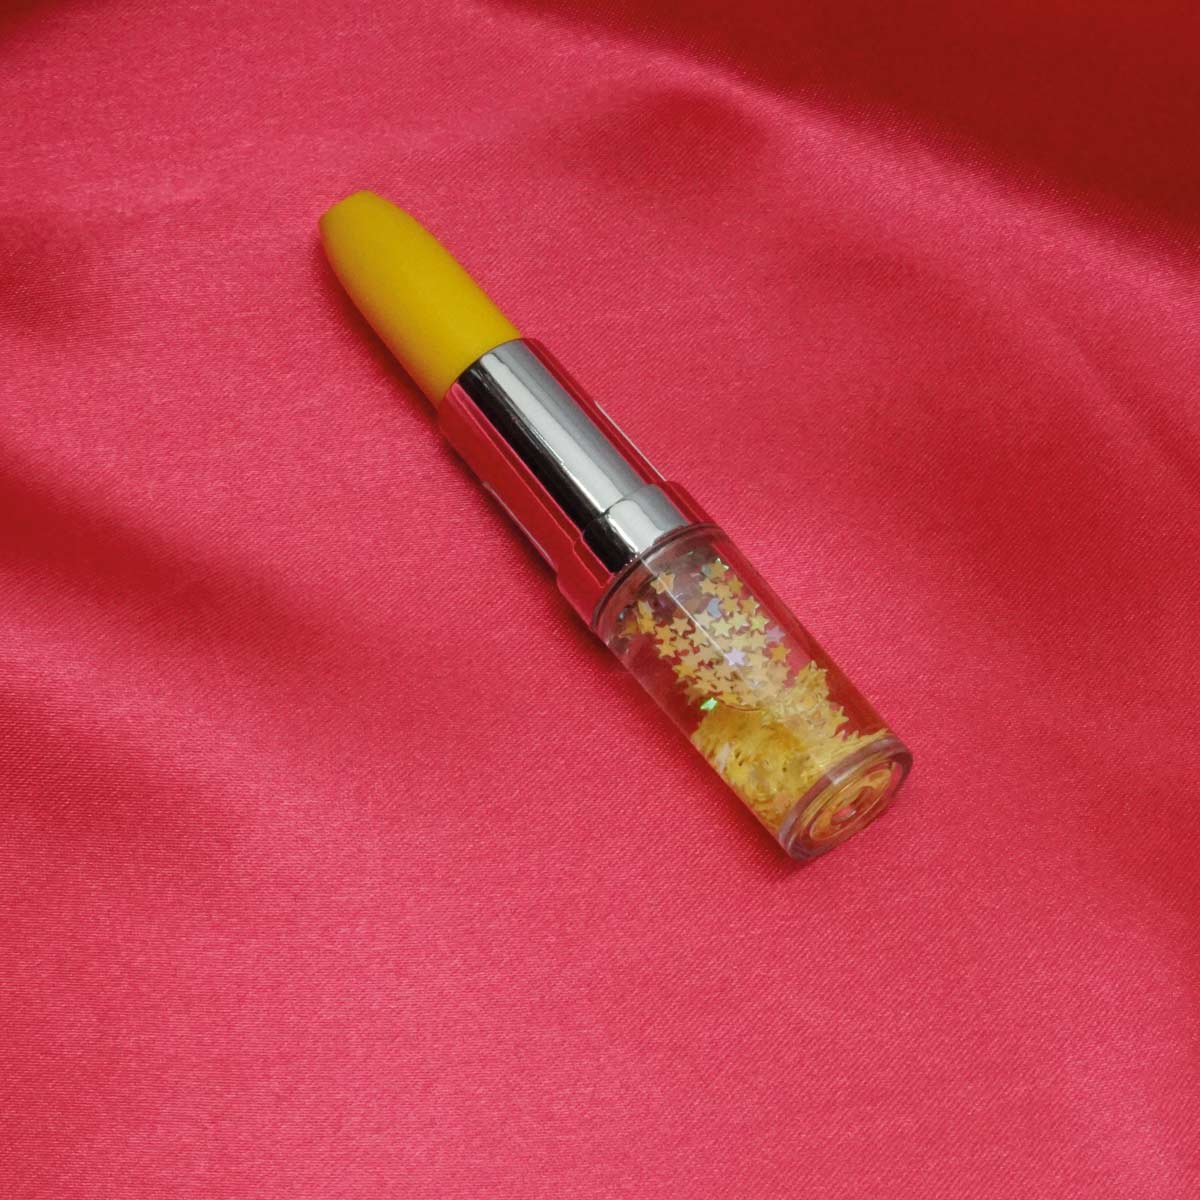 penhouse.in Attractive Yellow Color Body  With Star Design Glitter Lipstick Shape Cap Type Toy Gel Pen SKU 55009